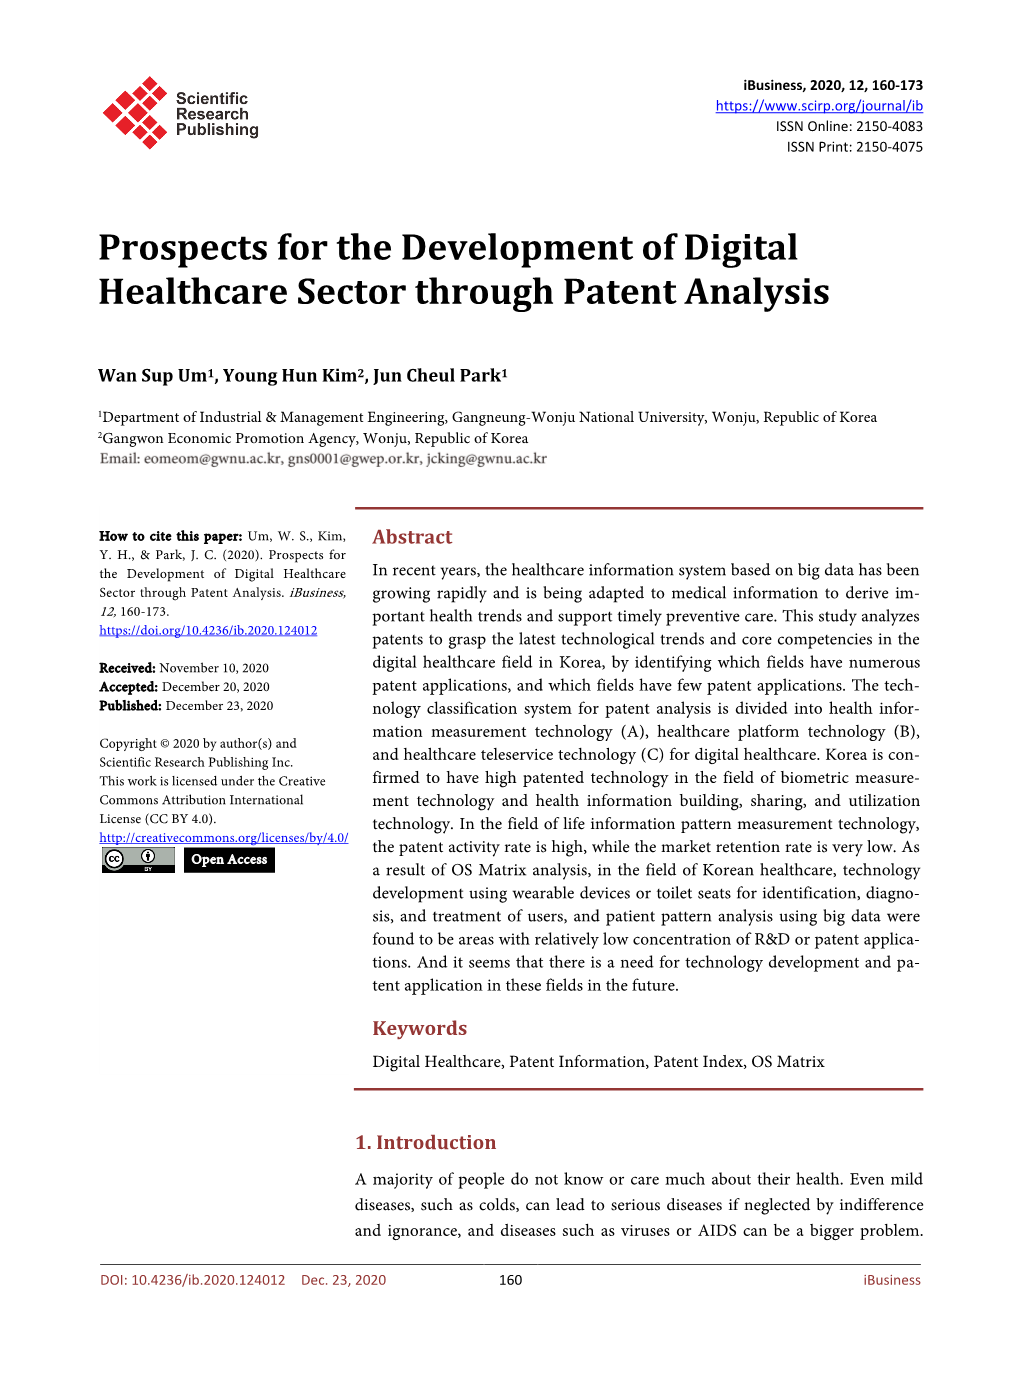 Prospects for the Development of Digital Healthcare Sector Through Patent Analysis